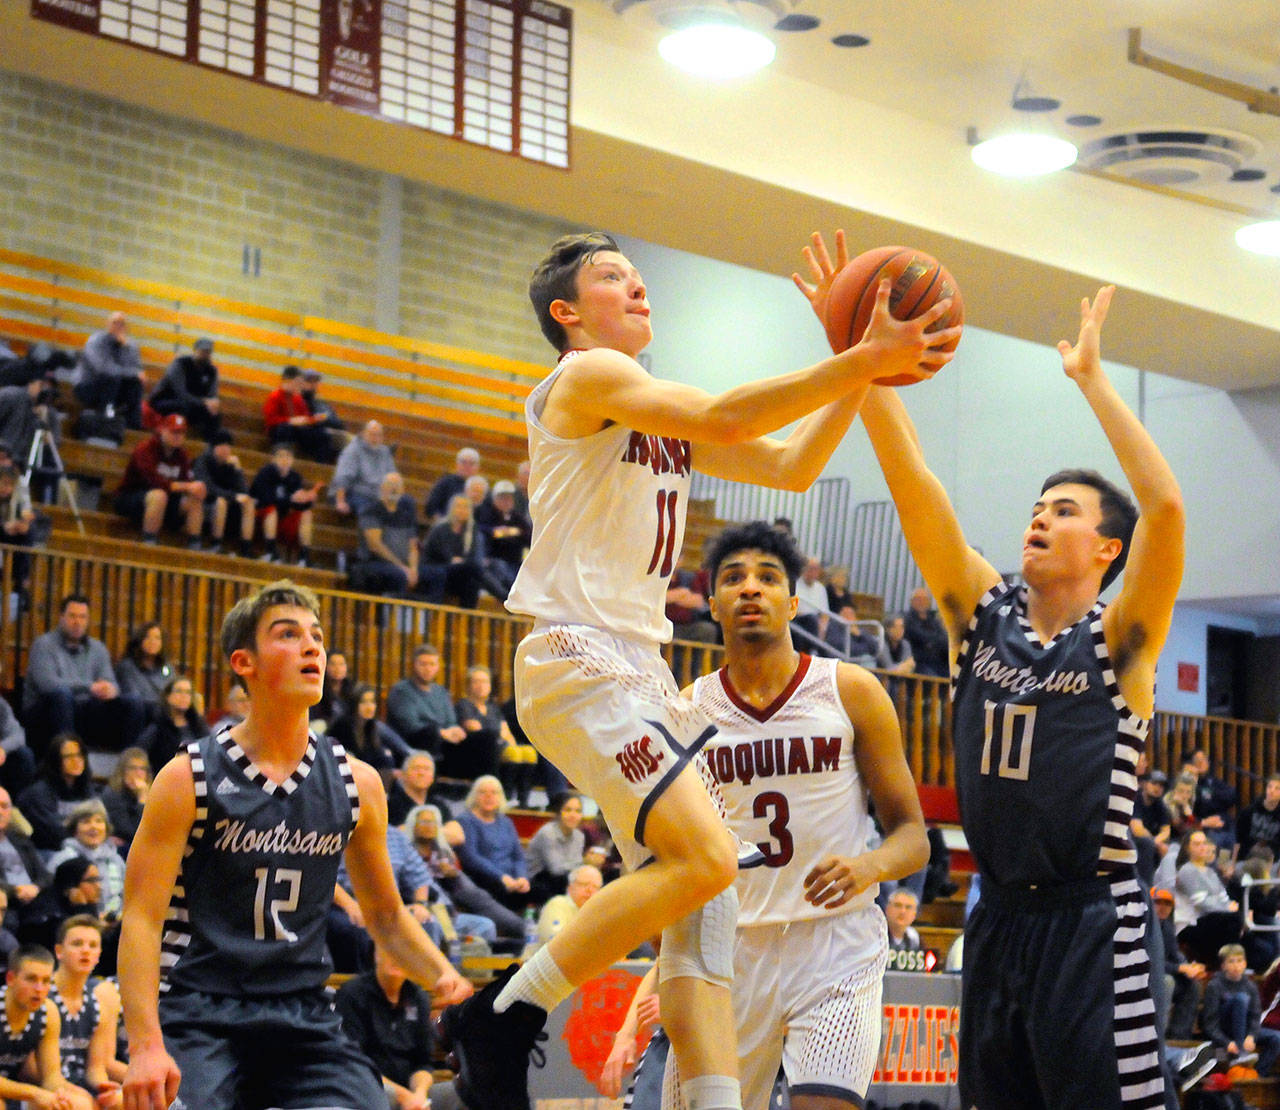 Hoquiam’s Cameron Bumstead finishes a reverse layup in the second quarter against Montesano on Wednesday. Bumstead scored 16 points and had four assists in Hoquiam’s 57-56 win. (Hasani Grayson | Grays Harbor News Group)